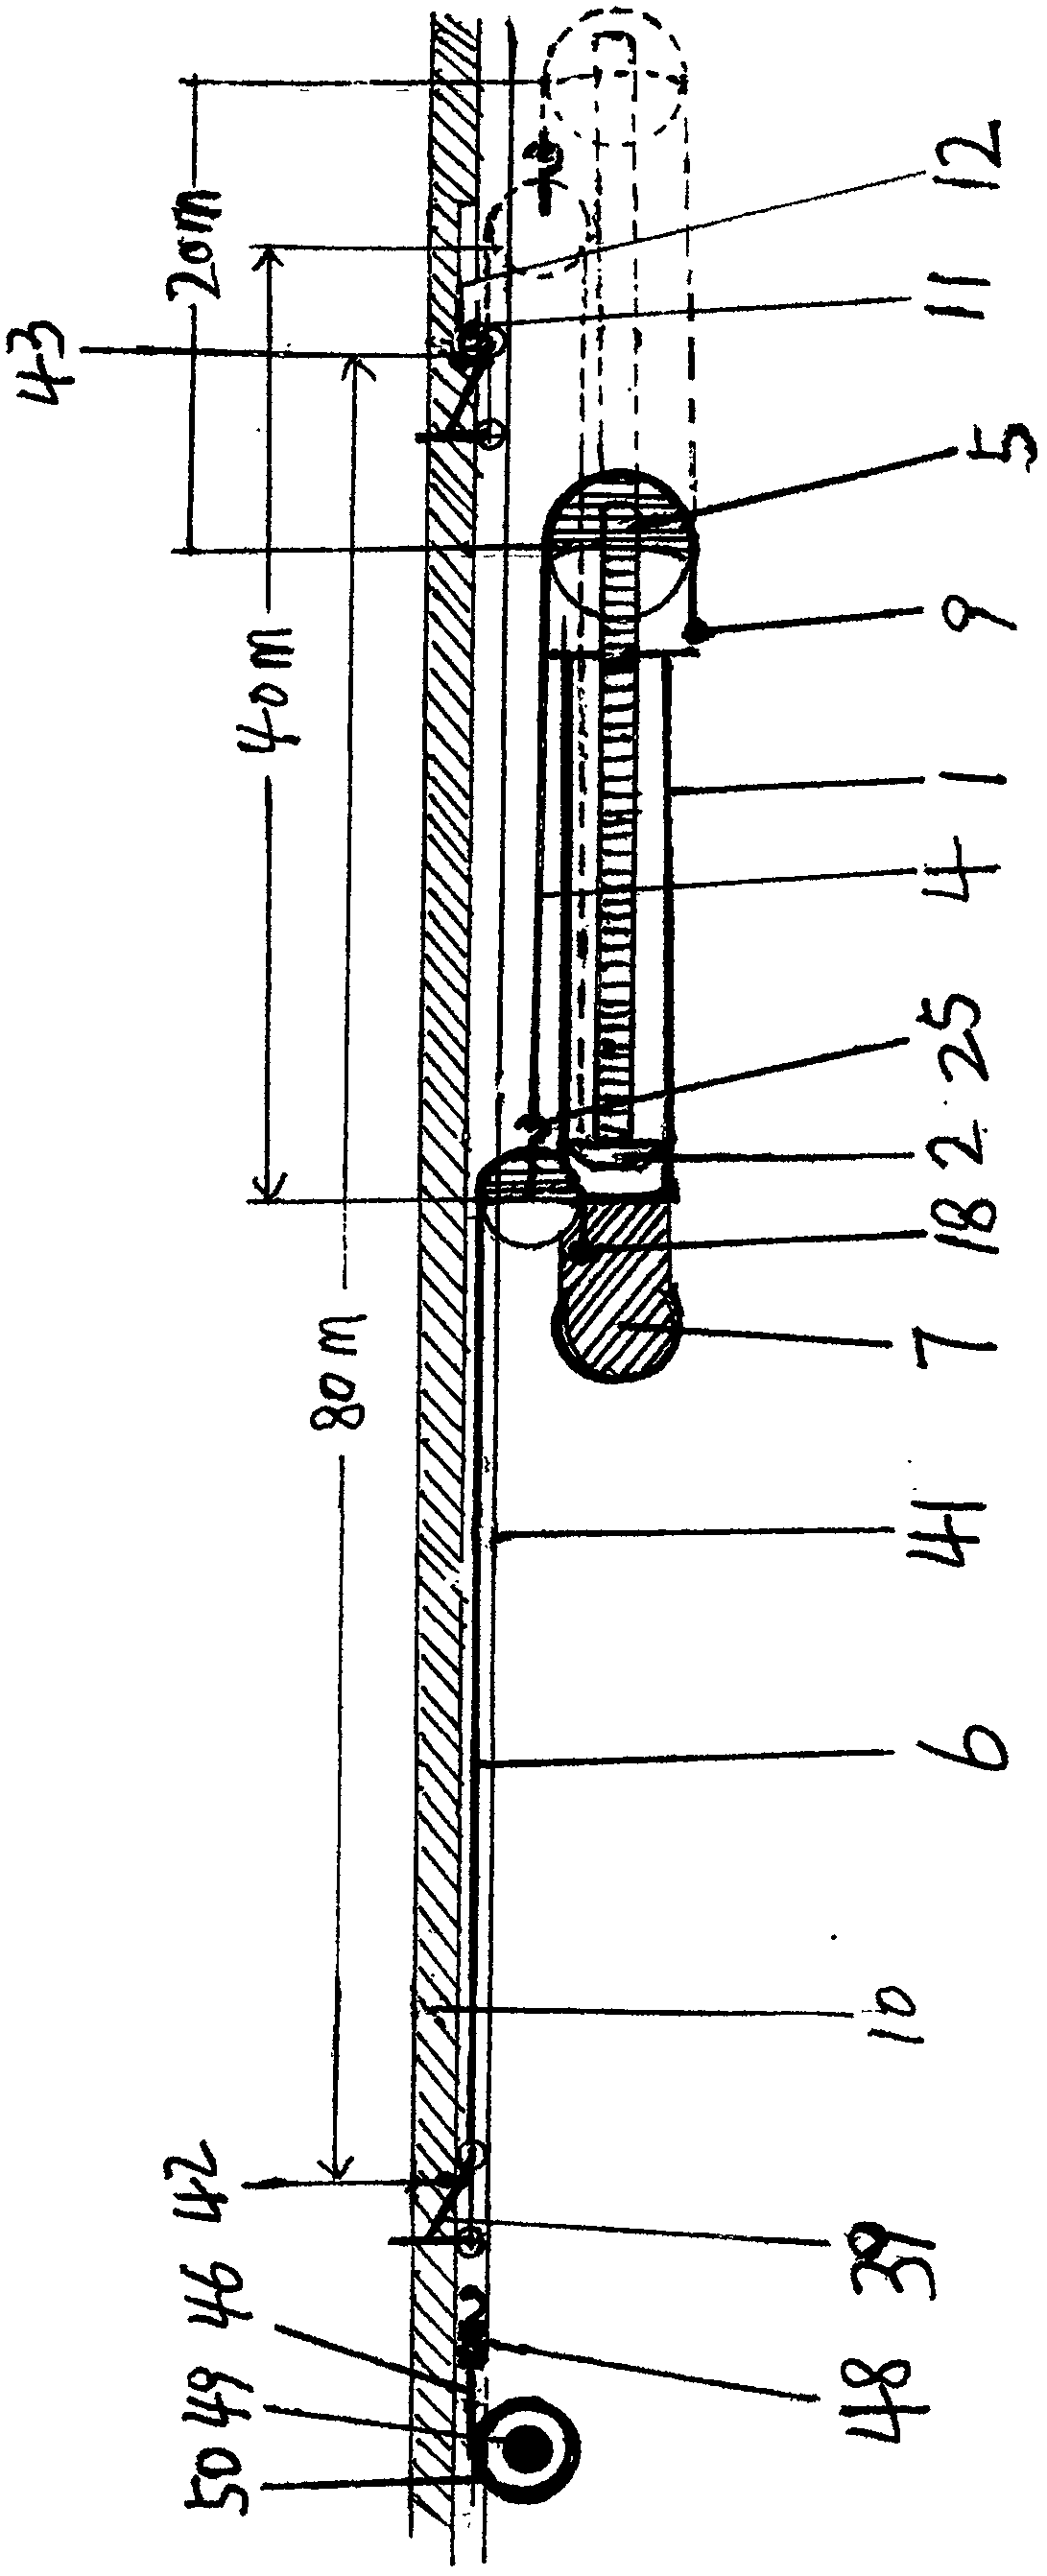 Two-stage type pulley block catapult of carrier-based aircraft